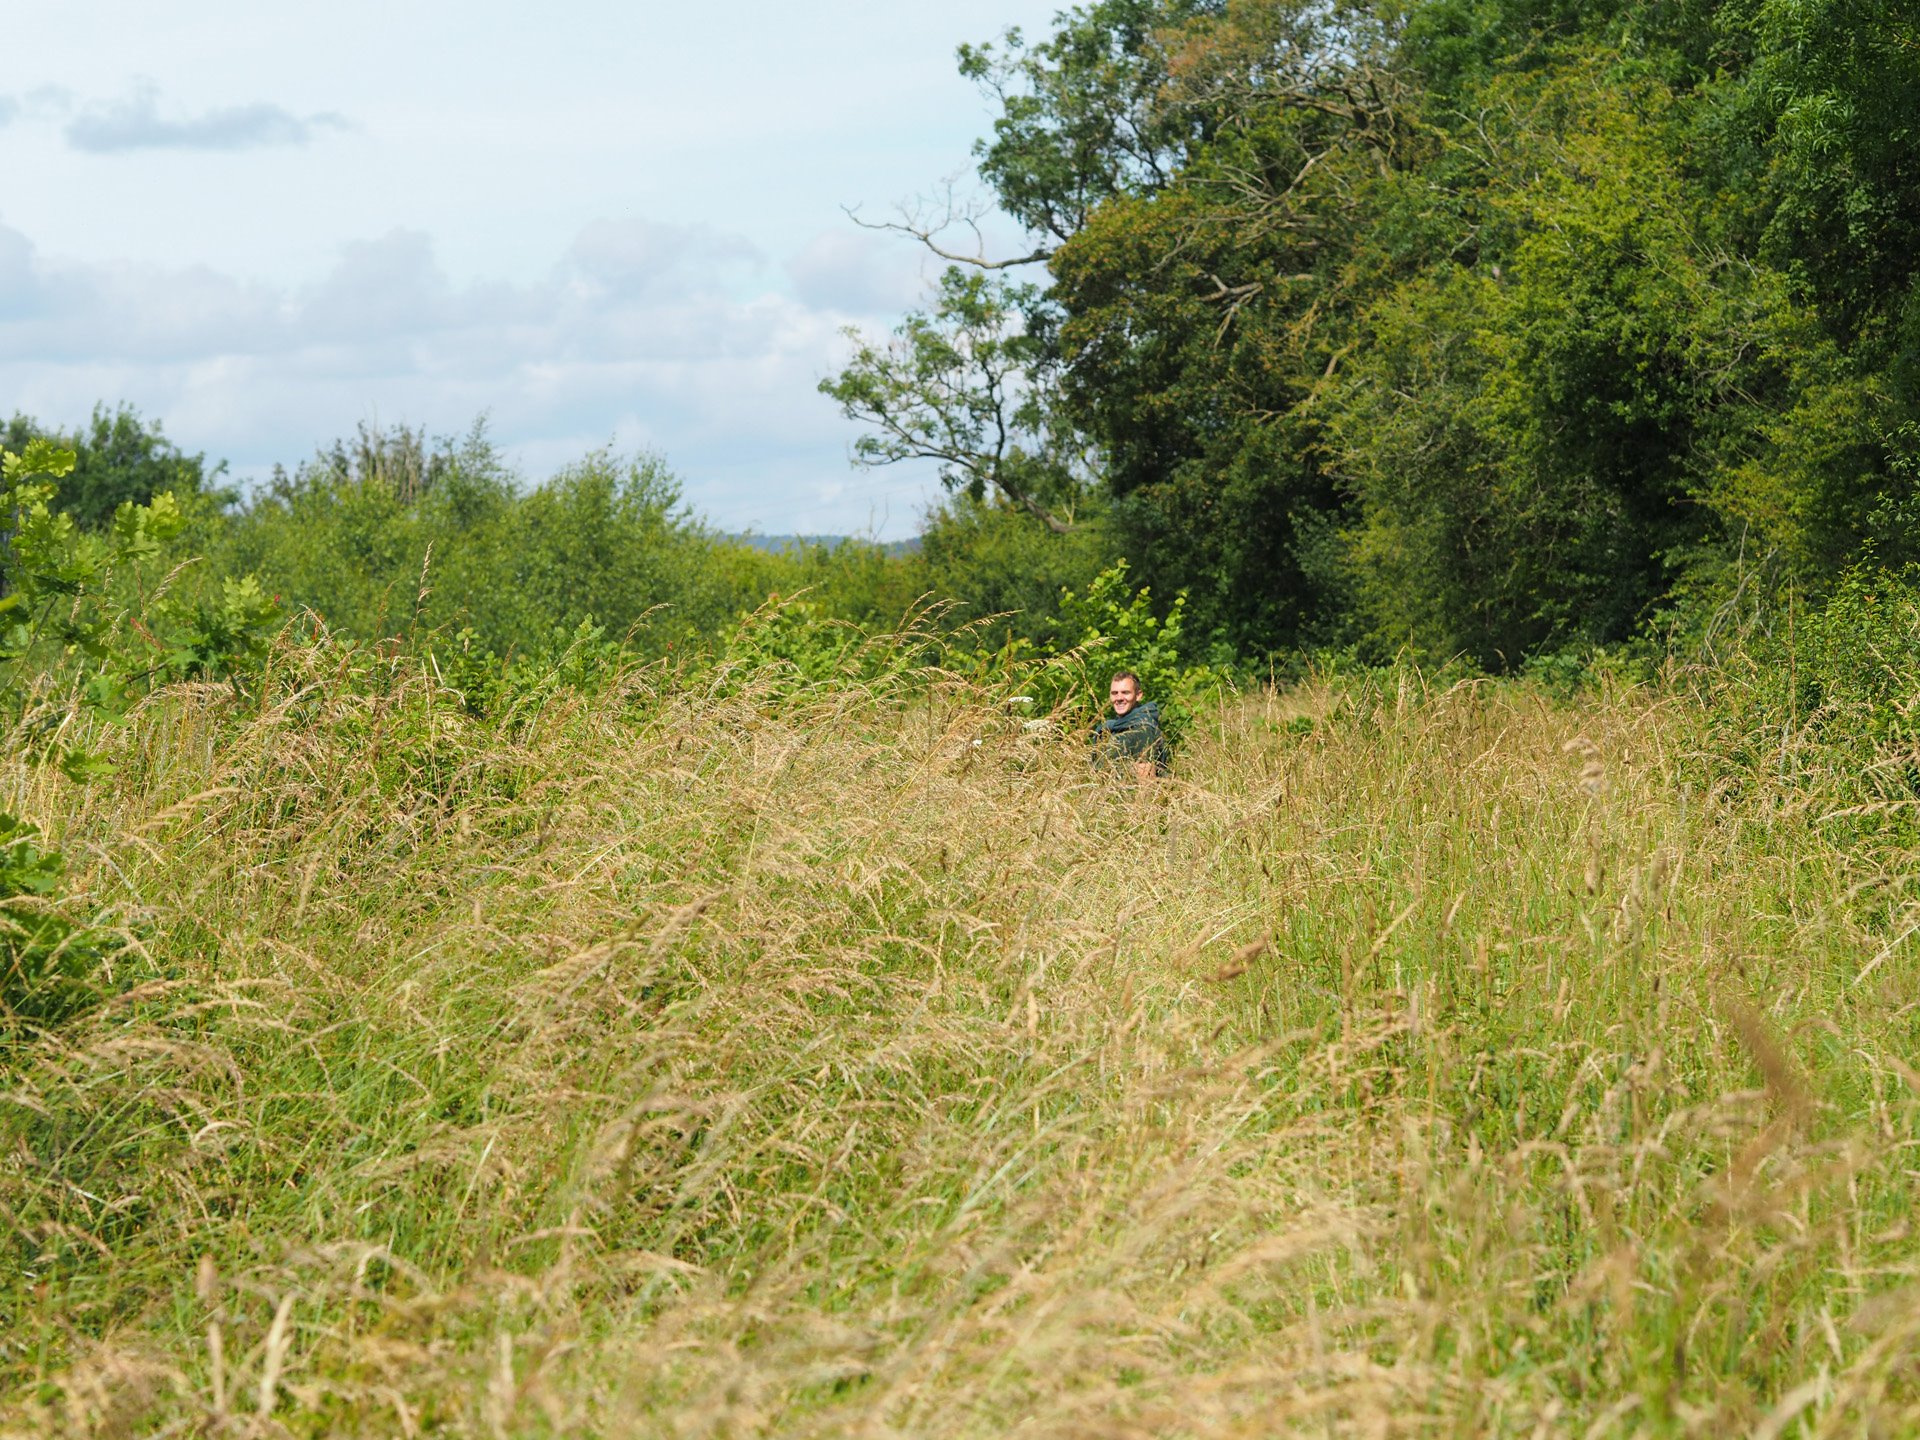 Long grasses thriving in the rewilding project at elmore court